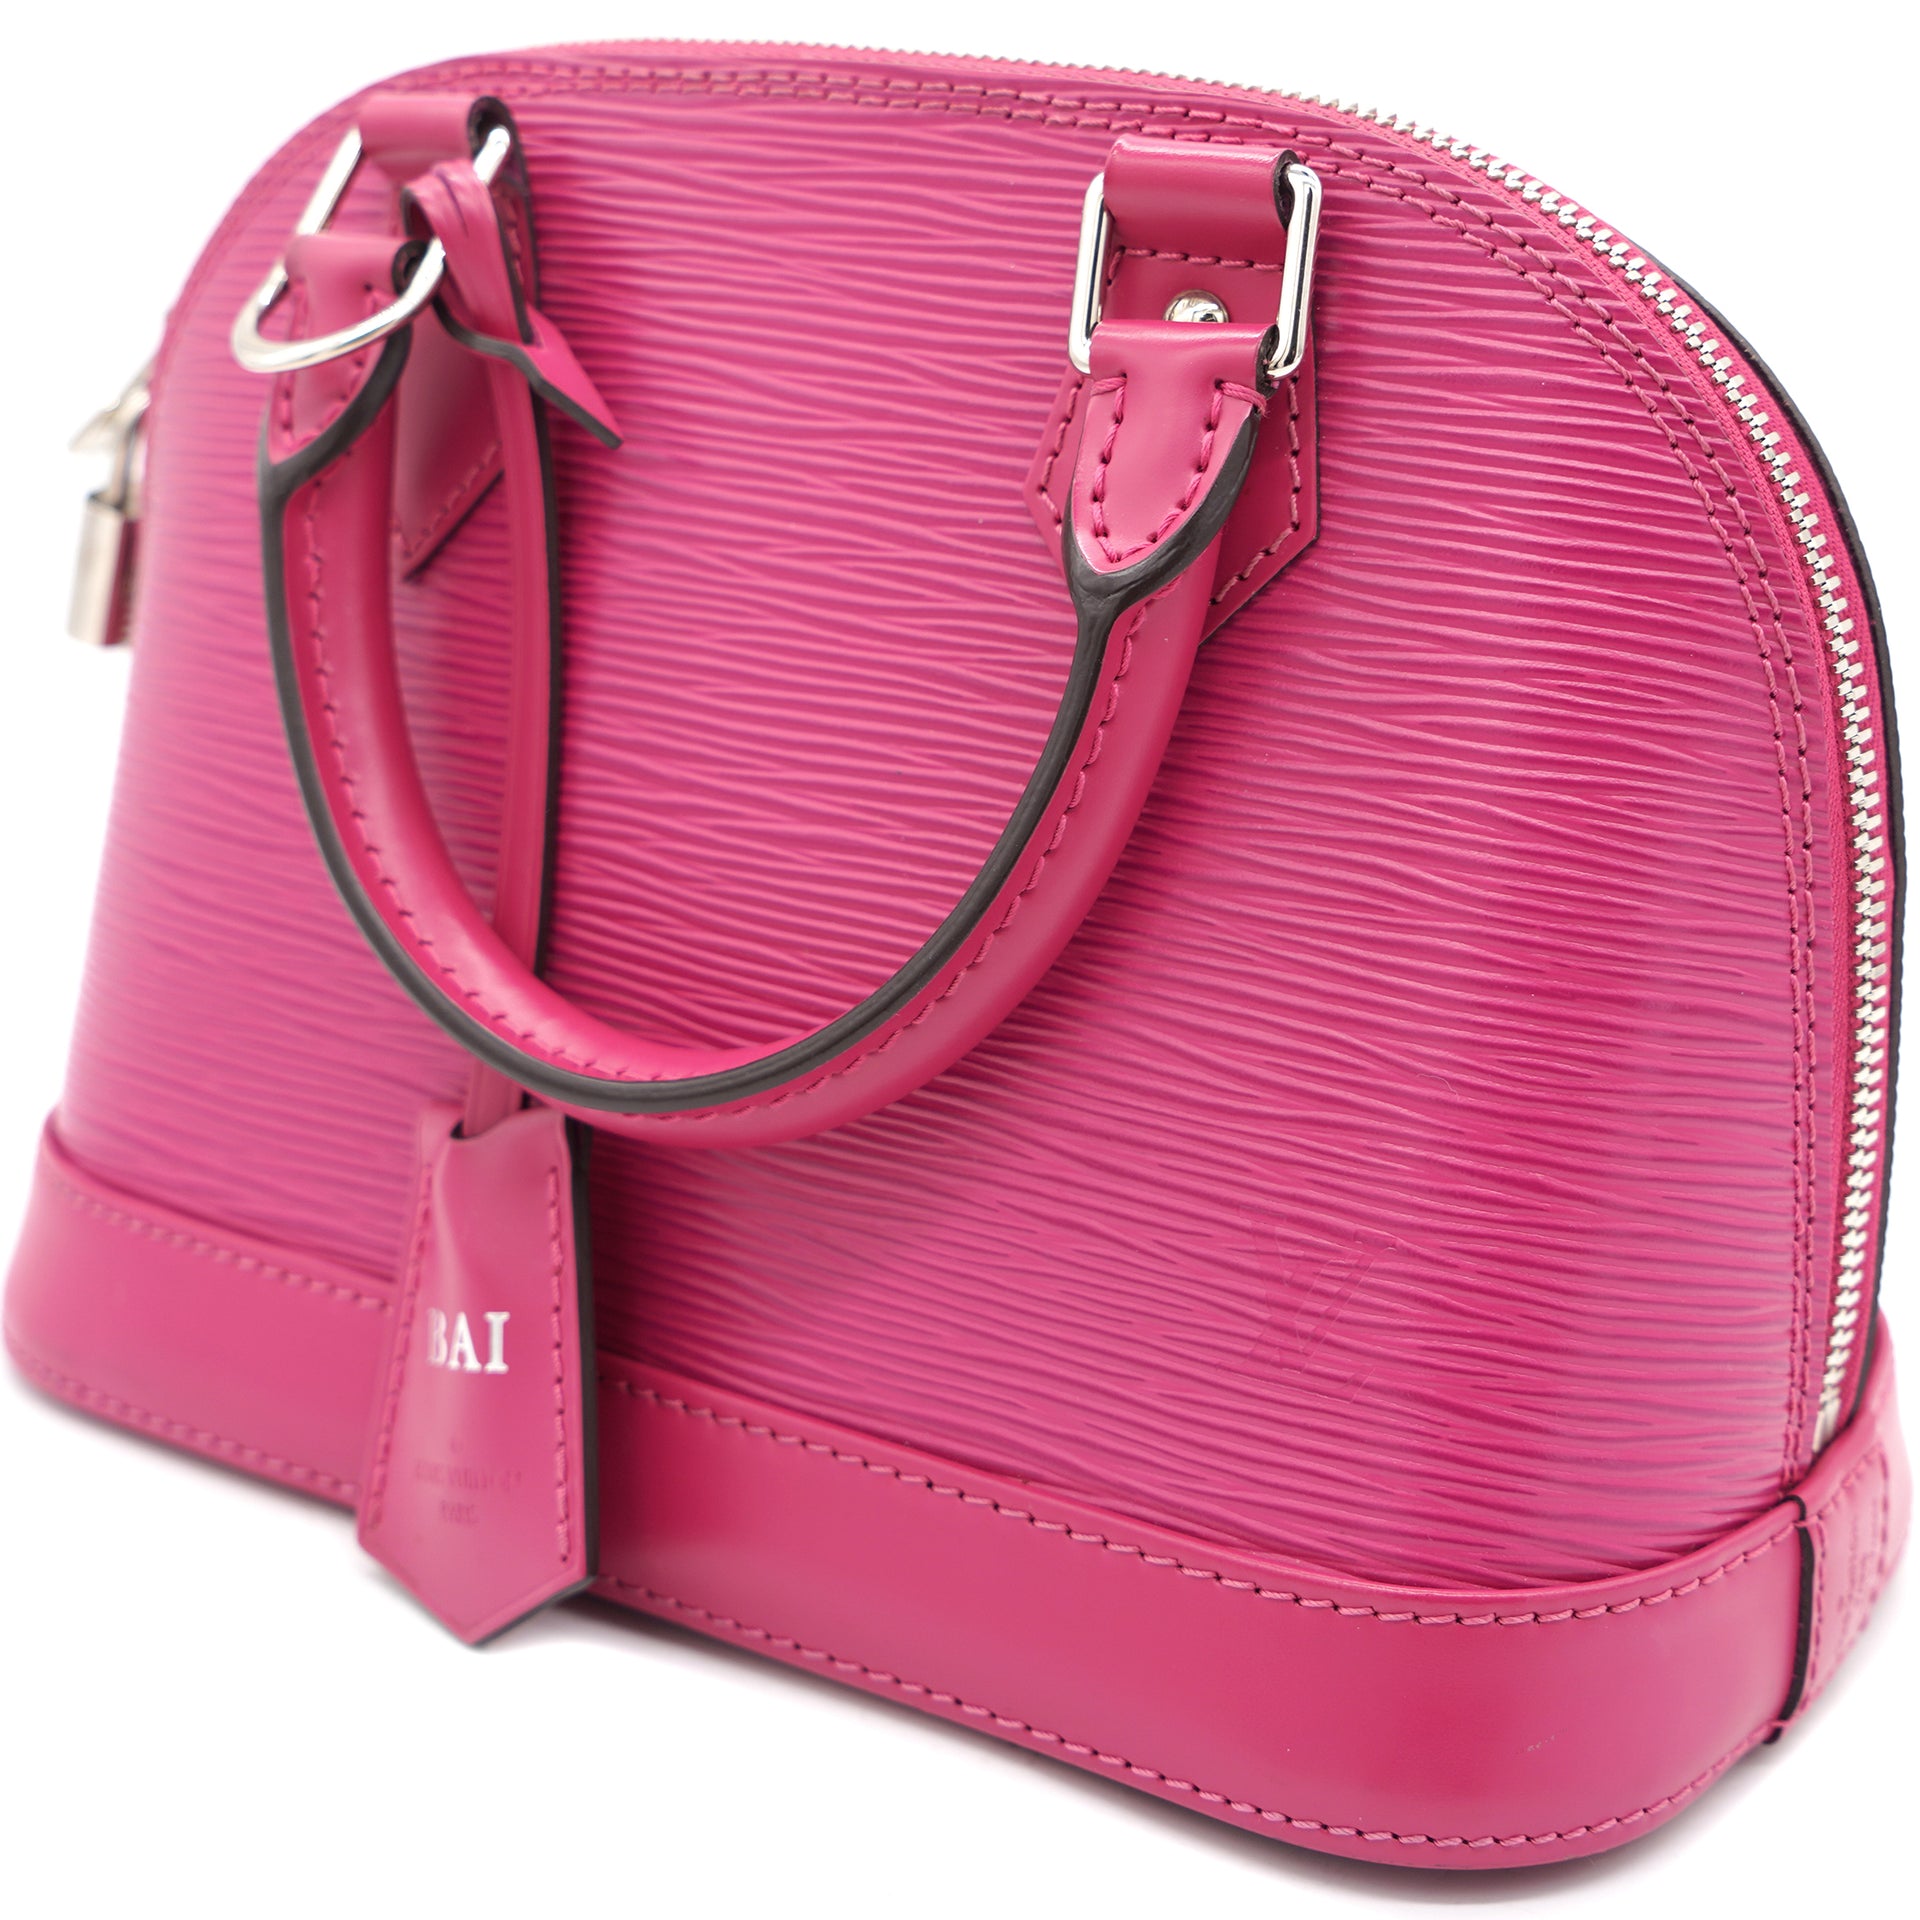 Alma bb leather handbag Louis Vuitton Pink in Leather - 25222773